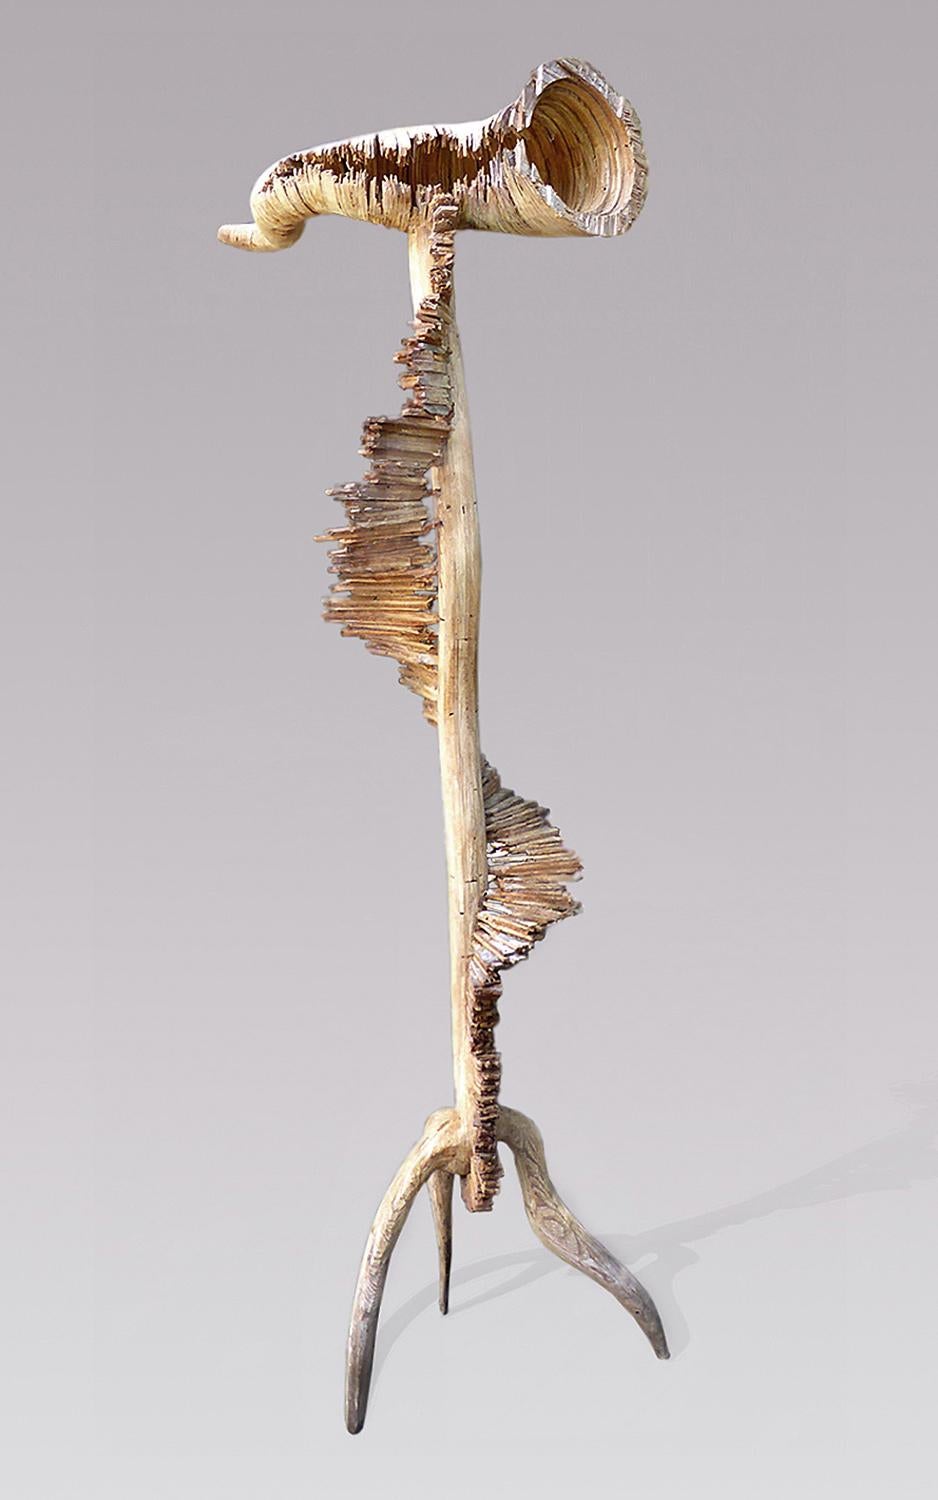 Jeff Key Abstract Sculpture - "Heed -- Do You Hear the Warning?" free-standing wood sculpture 